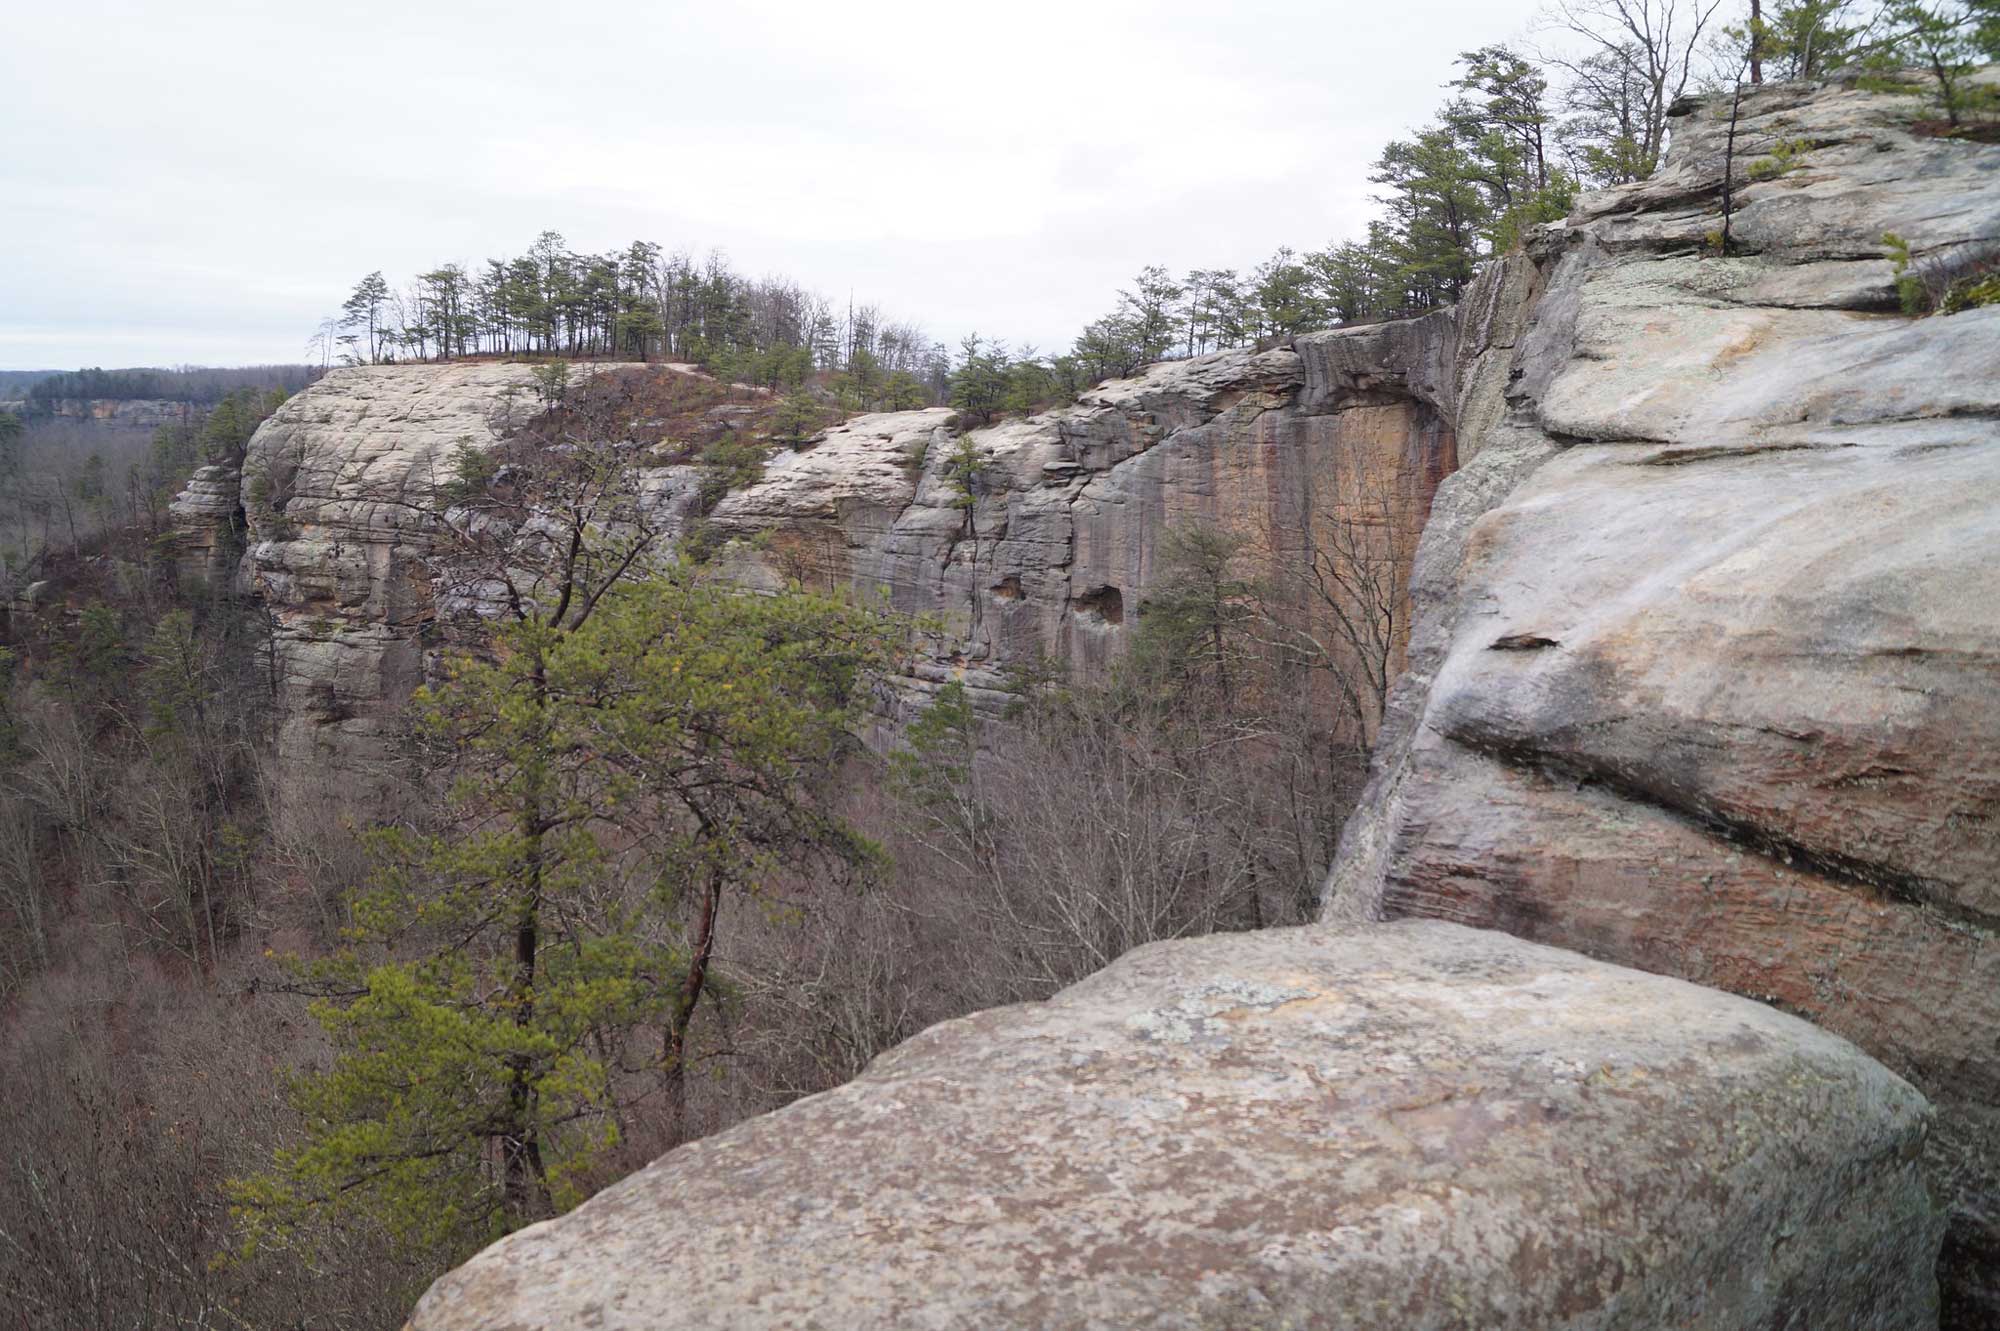 Photograph of rocks at Red River Gorge in Kentucky.